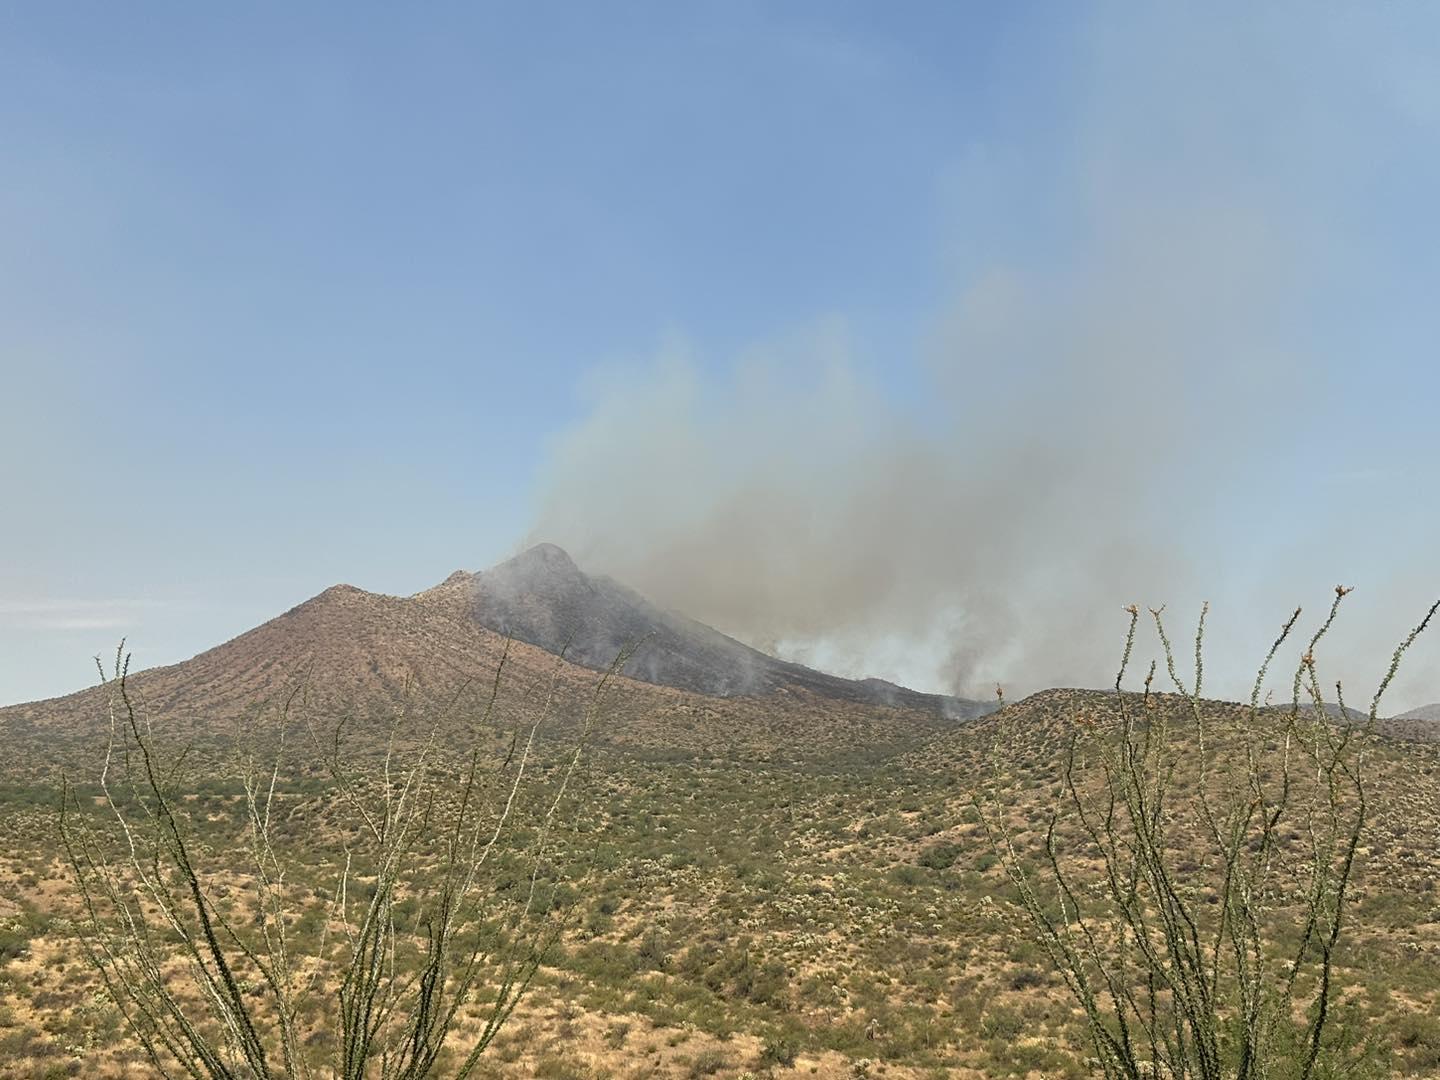 Smoke rising from a peak against a blue sky with desert vegetation